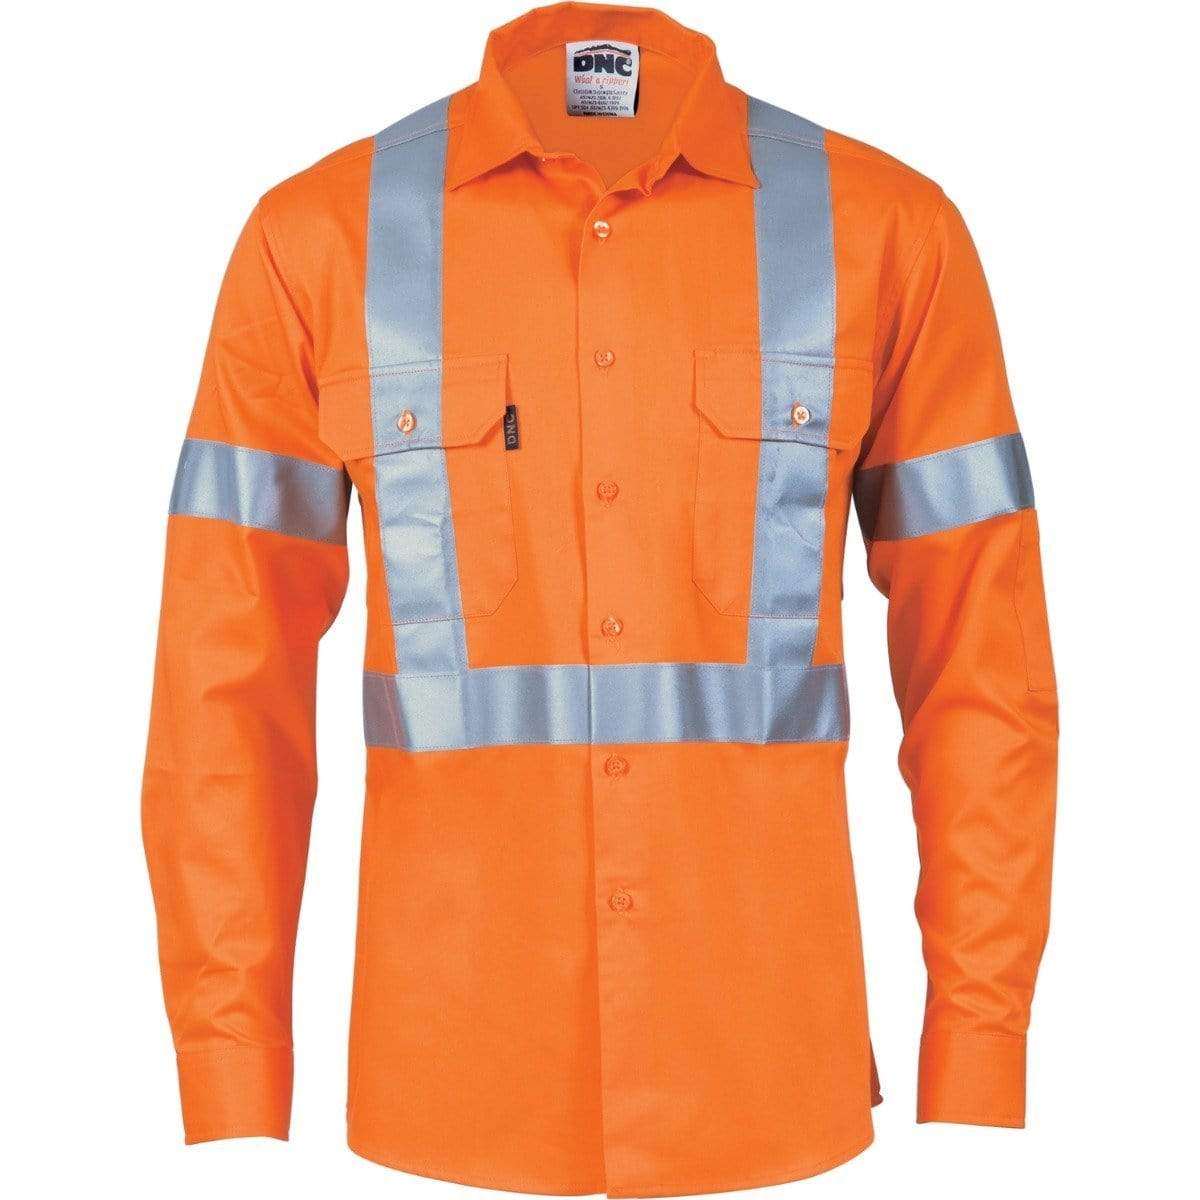 Dnc Workwear Hi-vis Cool-breeze Long Sleeve Cotton Shirt With X Back & Additional 3m Reflective Tape On Tail - 3746 Work Wear DNC Workwear Orange XS 